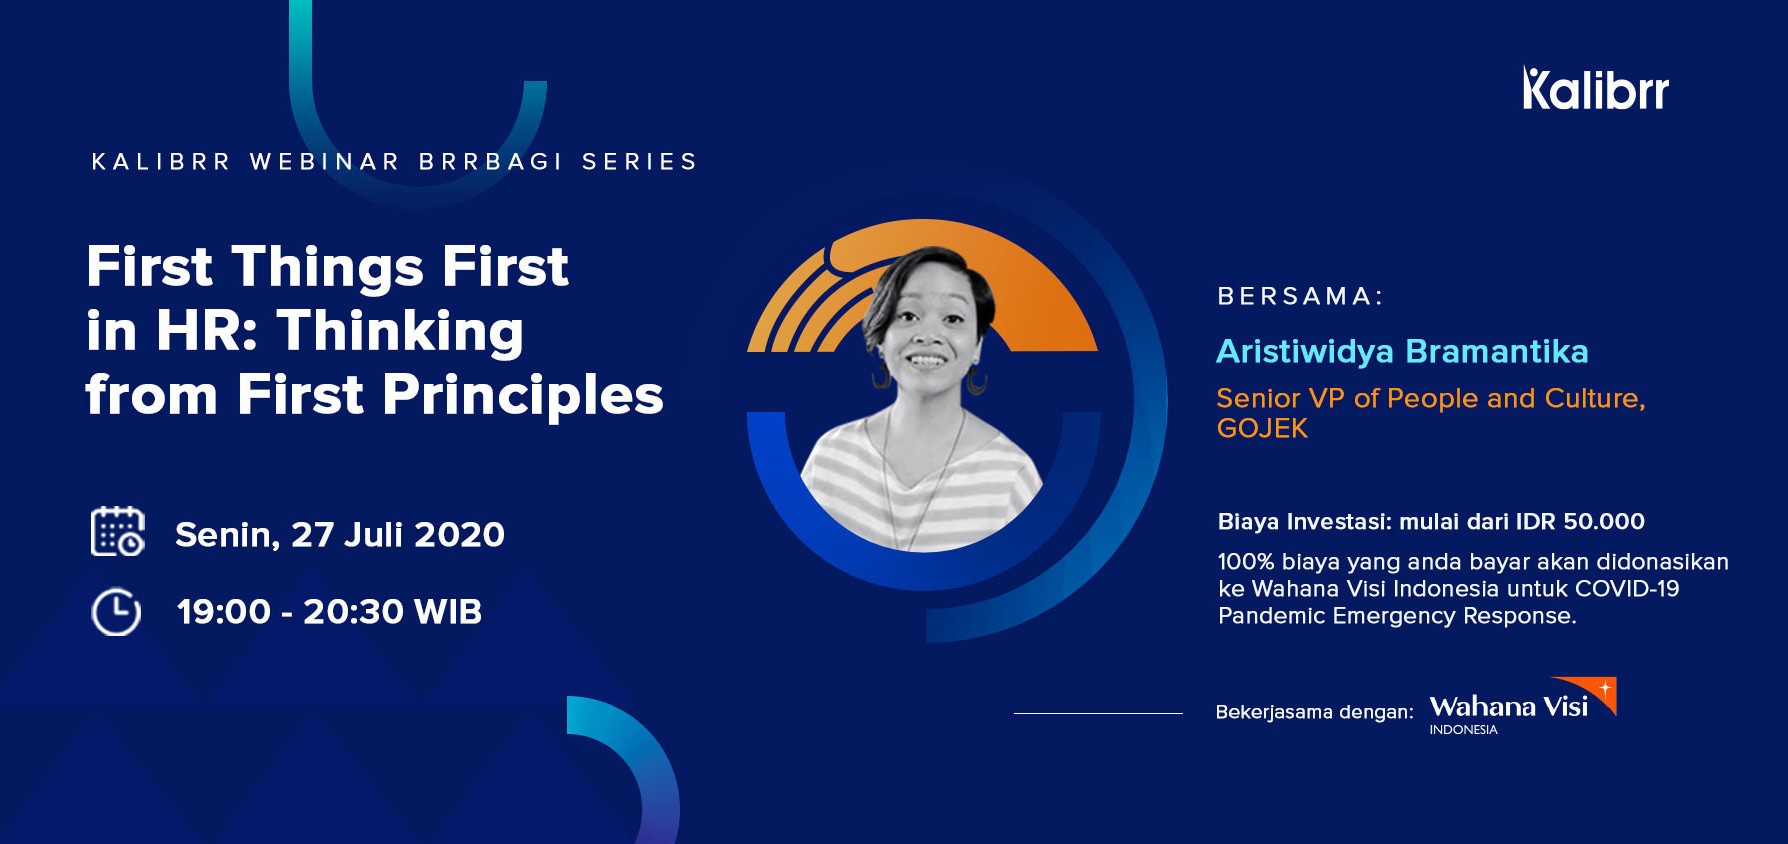 Kalibrr Webinar Brrbagi Series - First Things First in HR: Thinking from First Principles